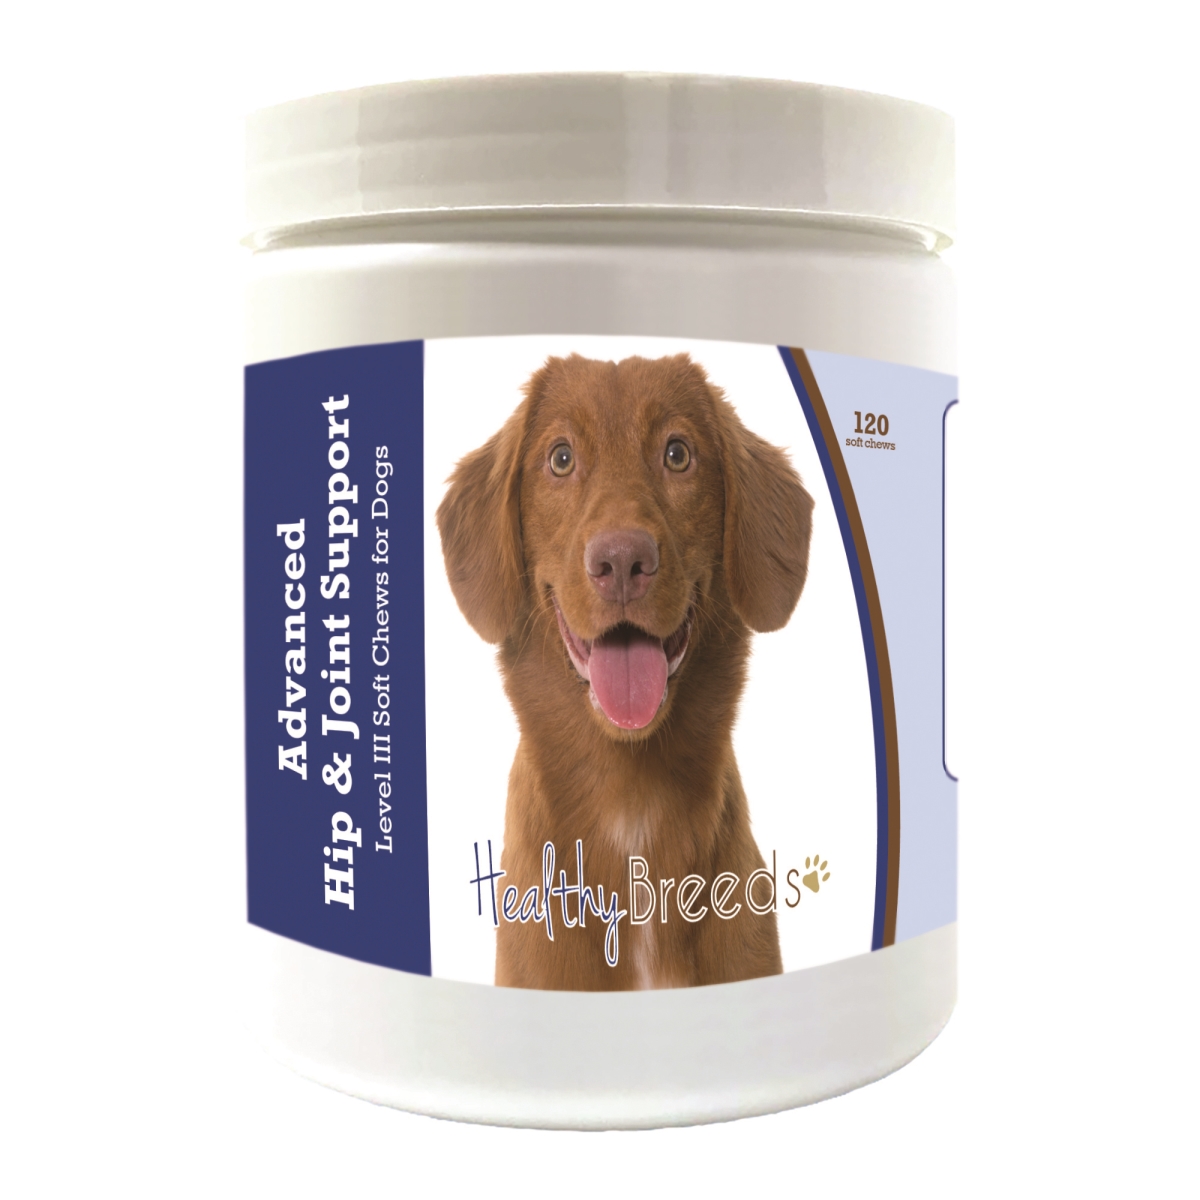 Picture of Healthy Breeds 192959898835 Nova Scotia Duck Tolling Retriever Advanced Hip & Joint Support Level III Soft Chews for Dogs